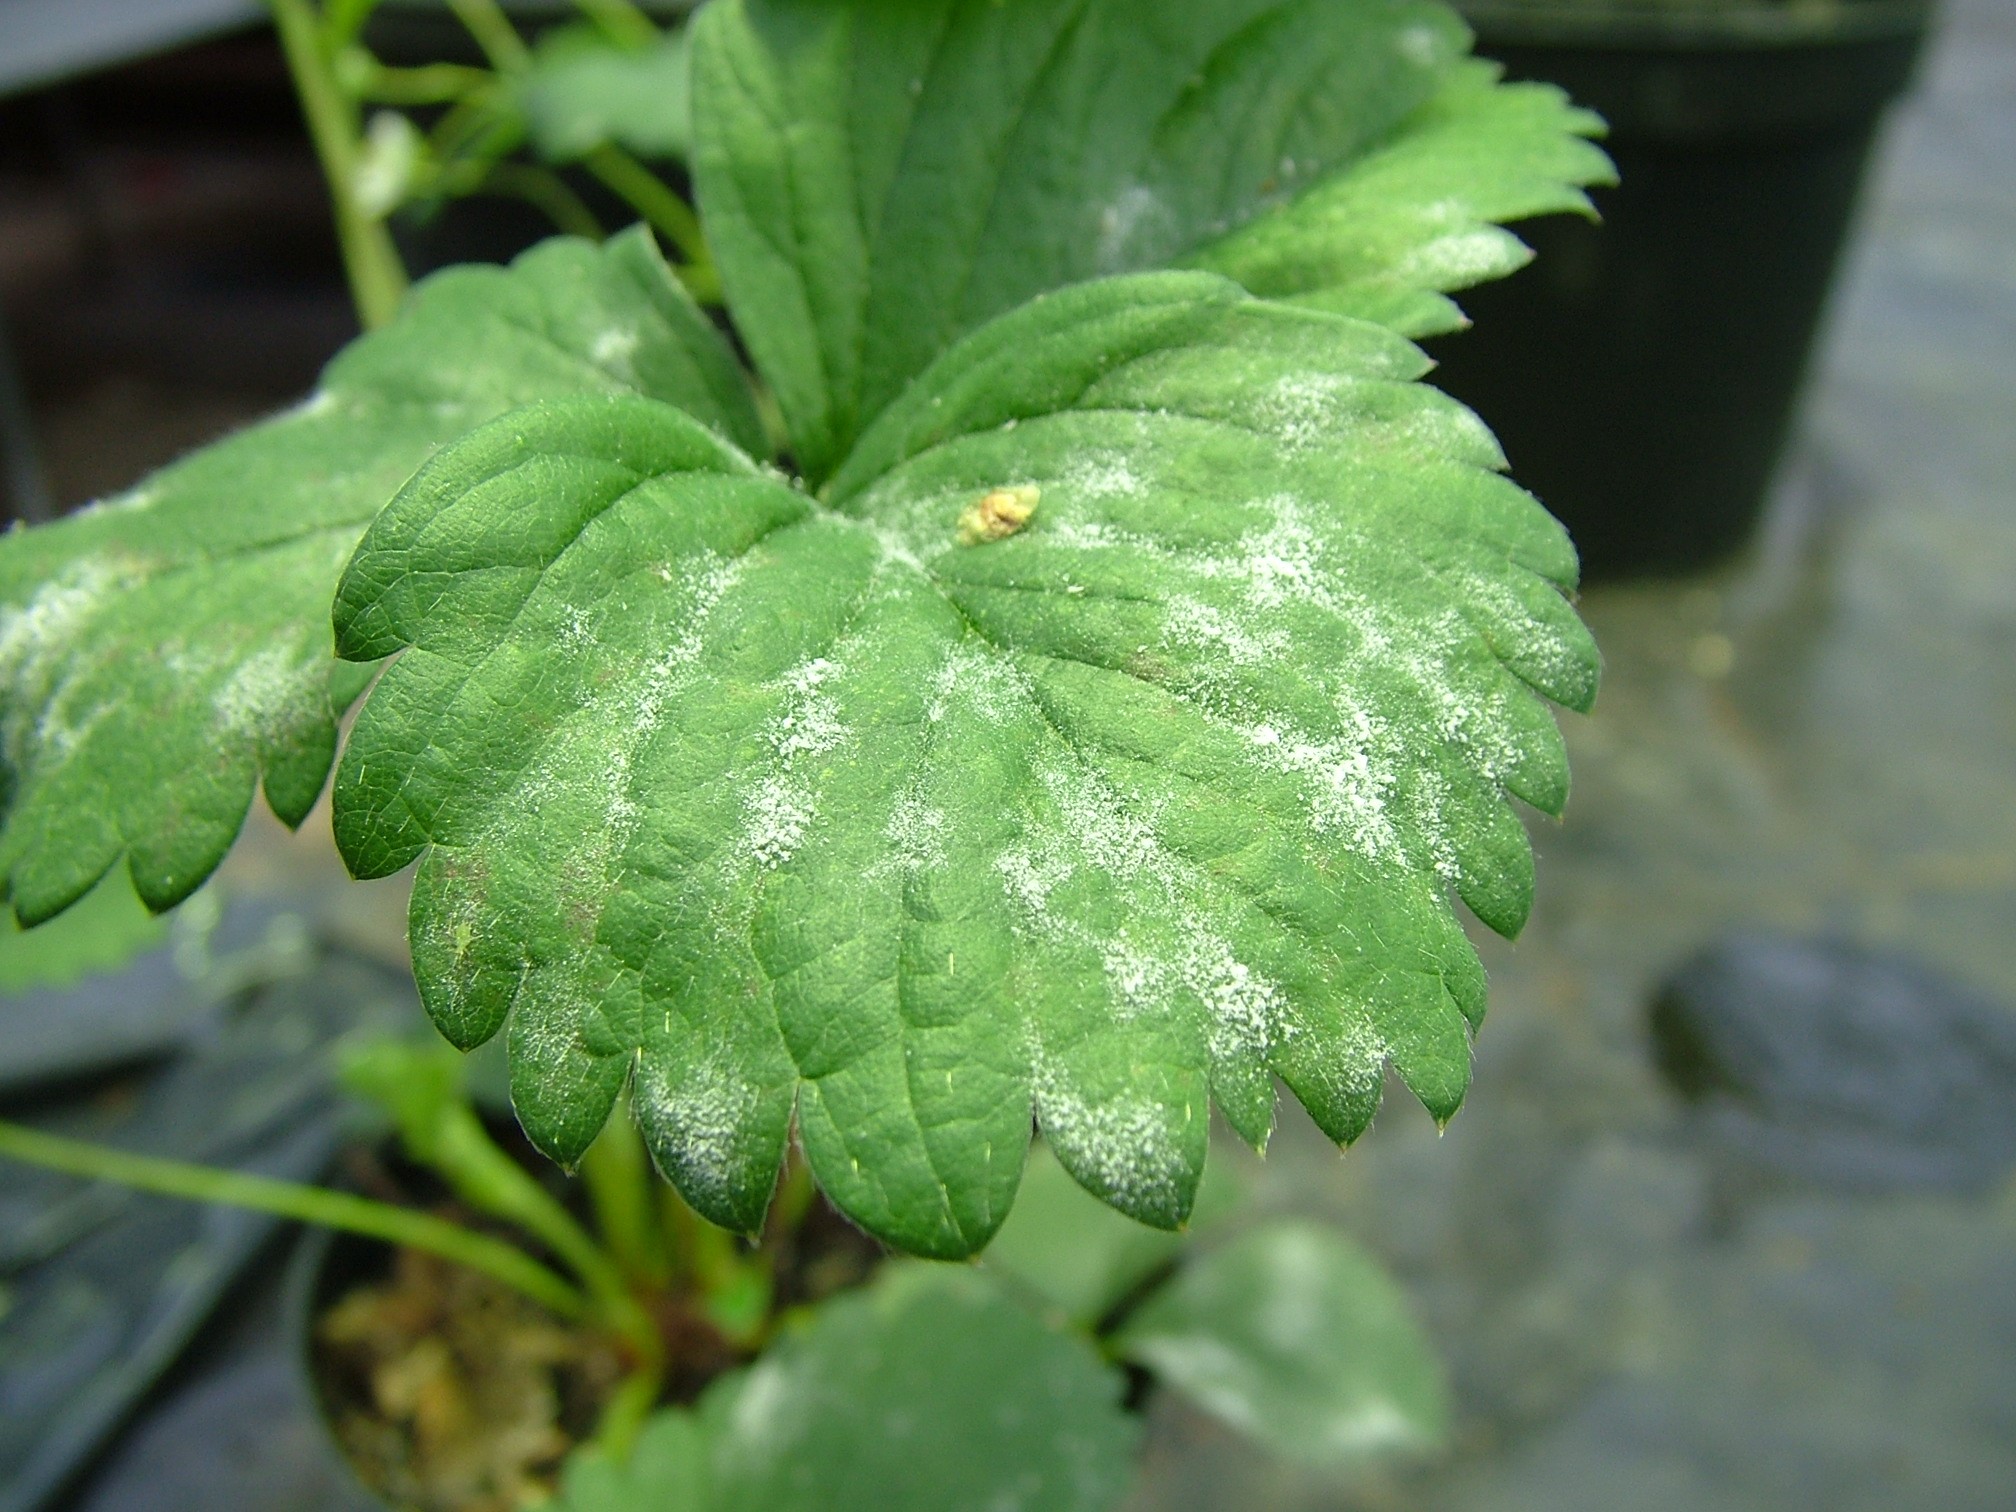 Close up photo of powdery mildew on a strawberry leaf